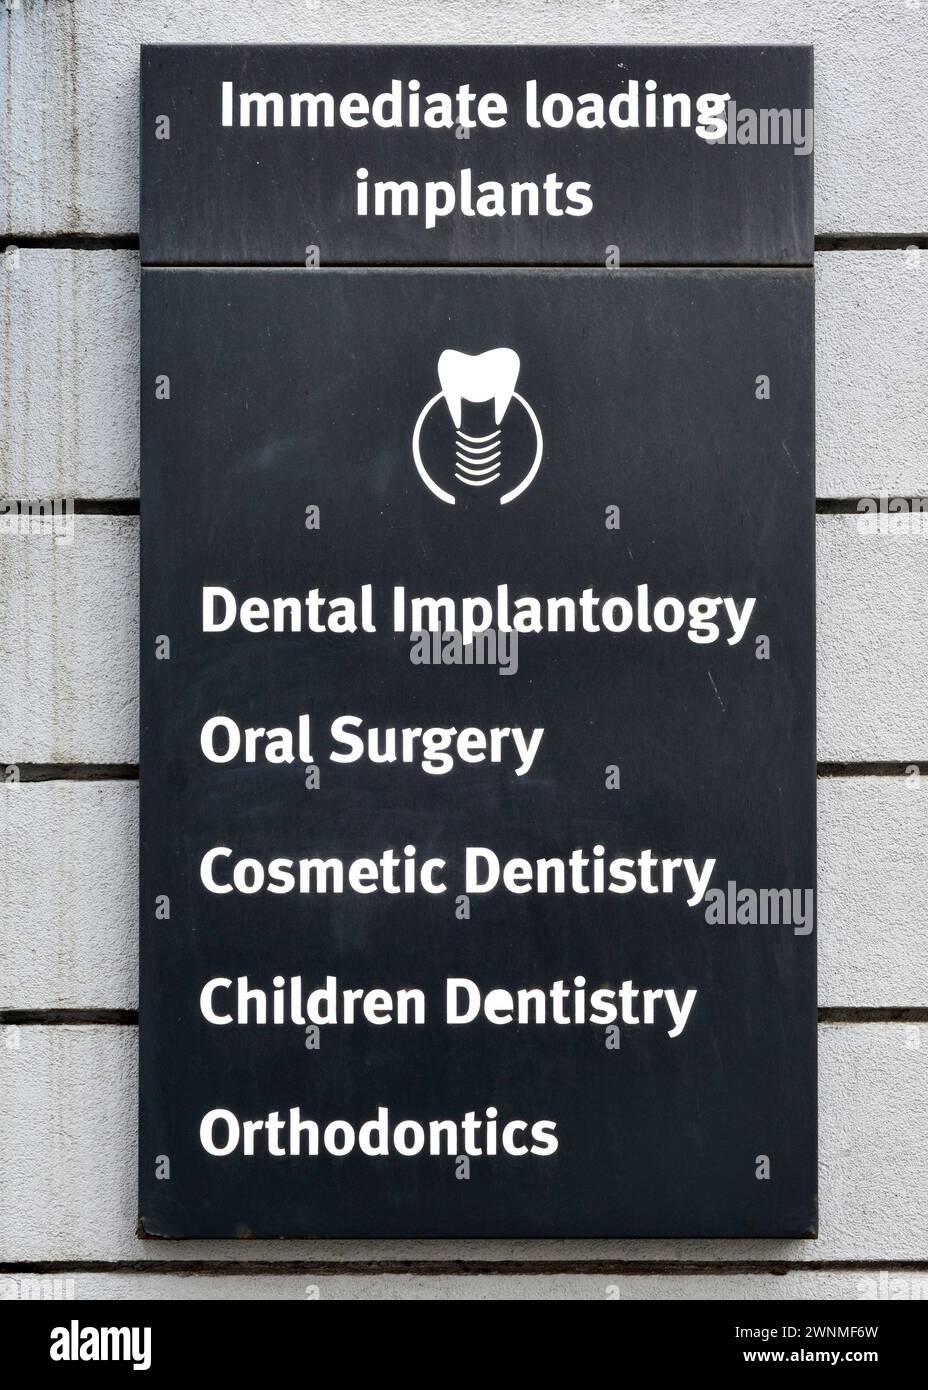 Immediate loading implants, dental implantology, oral surgery, cosmetic dentistry, children dentistry, orthodontics sign at dental services practice Stock Photo